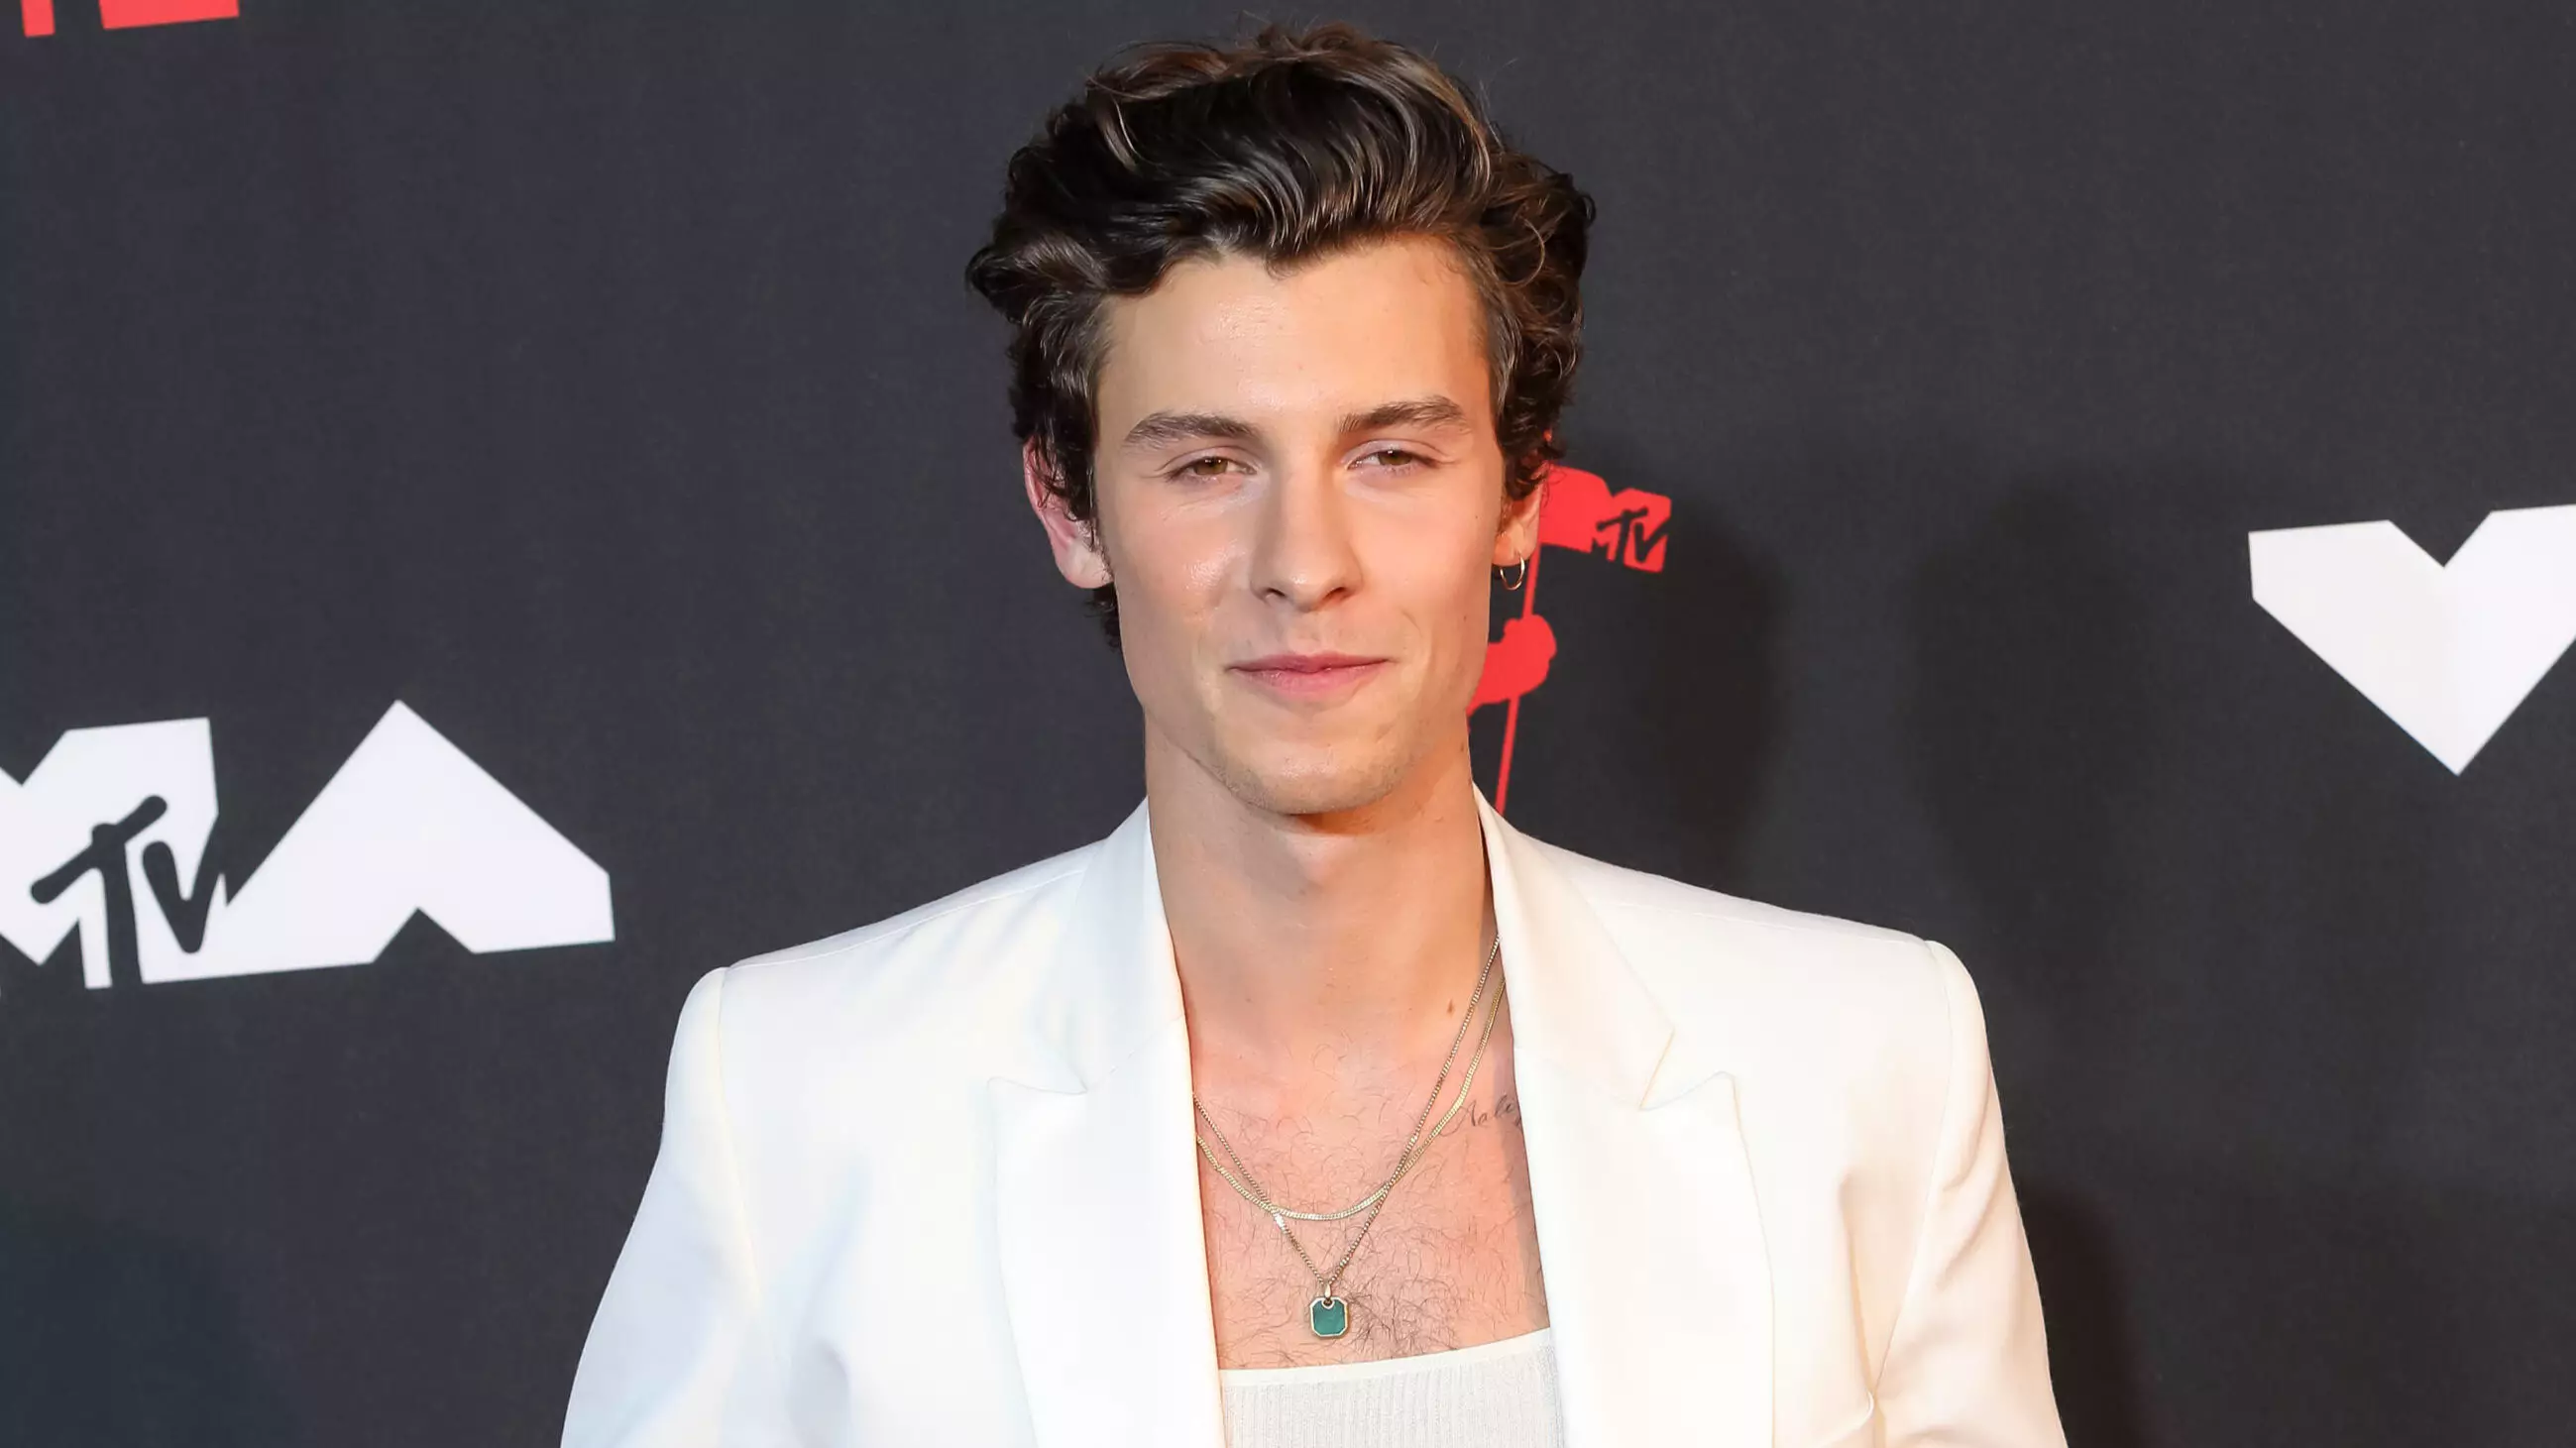 Who Is Shawn Mendes Dating In 2021?